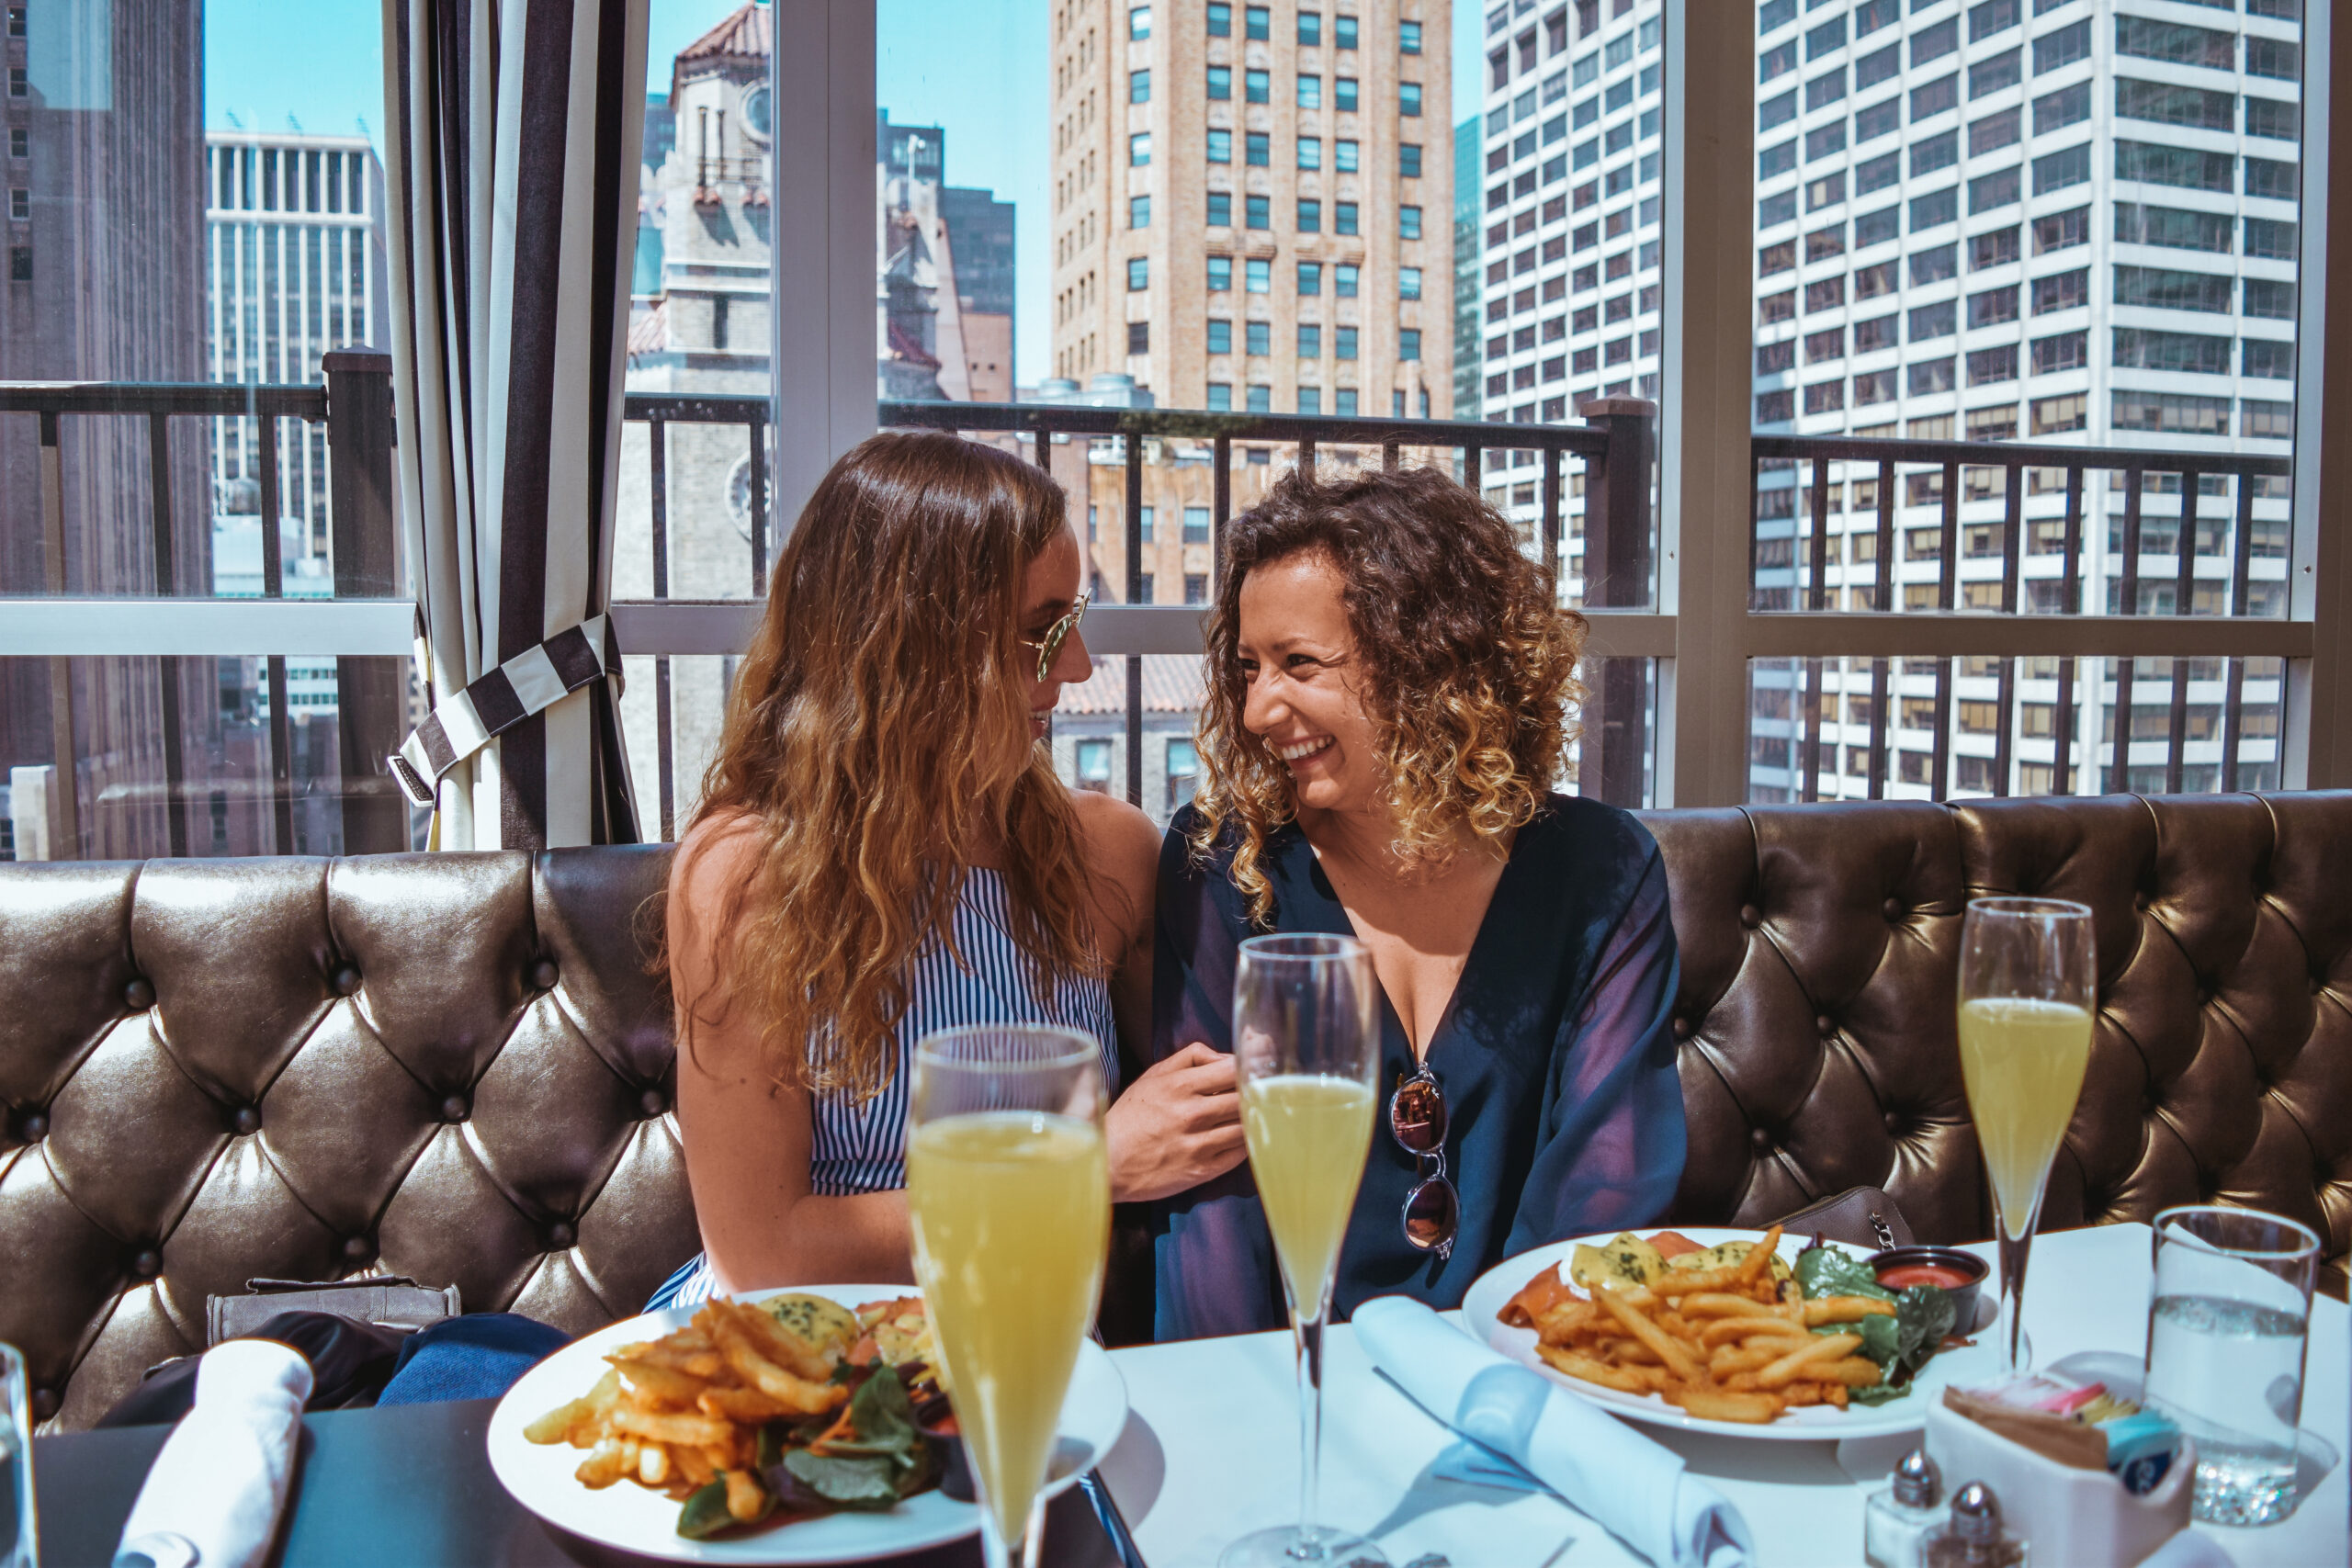 Turn Down For Brunch: Upstairs at the Kimberly Hotel svadore travel blogger lifestyle manhattan midtown best rooftop brunch spot nyc new york SVADORE